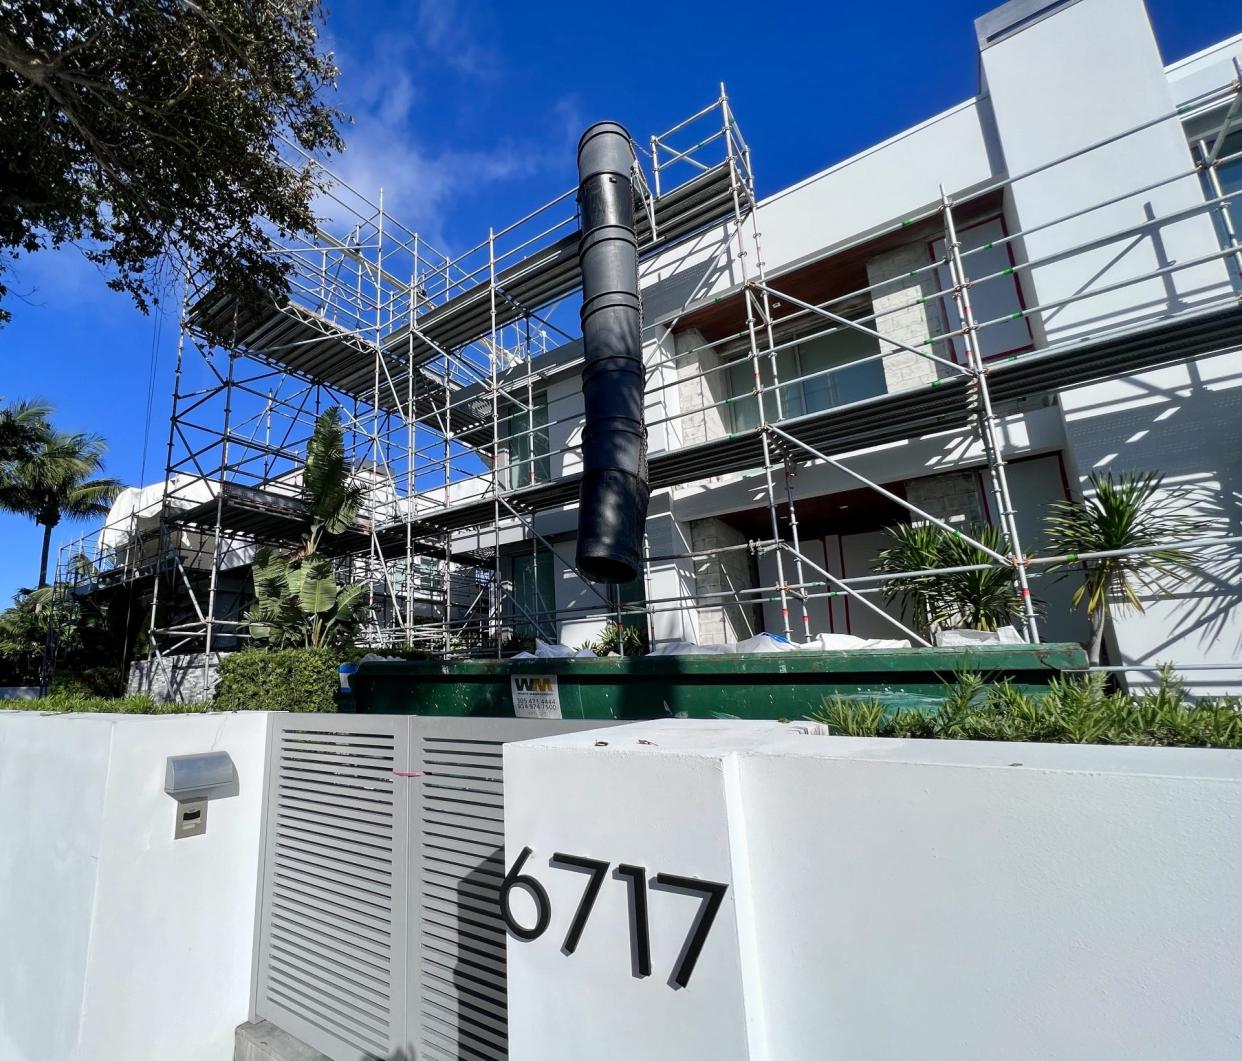 The home at 6717 S. Flagler Drive in West Palm Beach was purchased in 2021 for $16.2 million. At the time it was a record-high sale for a single-family home in West Palm Beach. The owner filed a lawsuit in 2022 alleging multiple defects in the home.